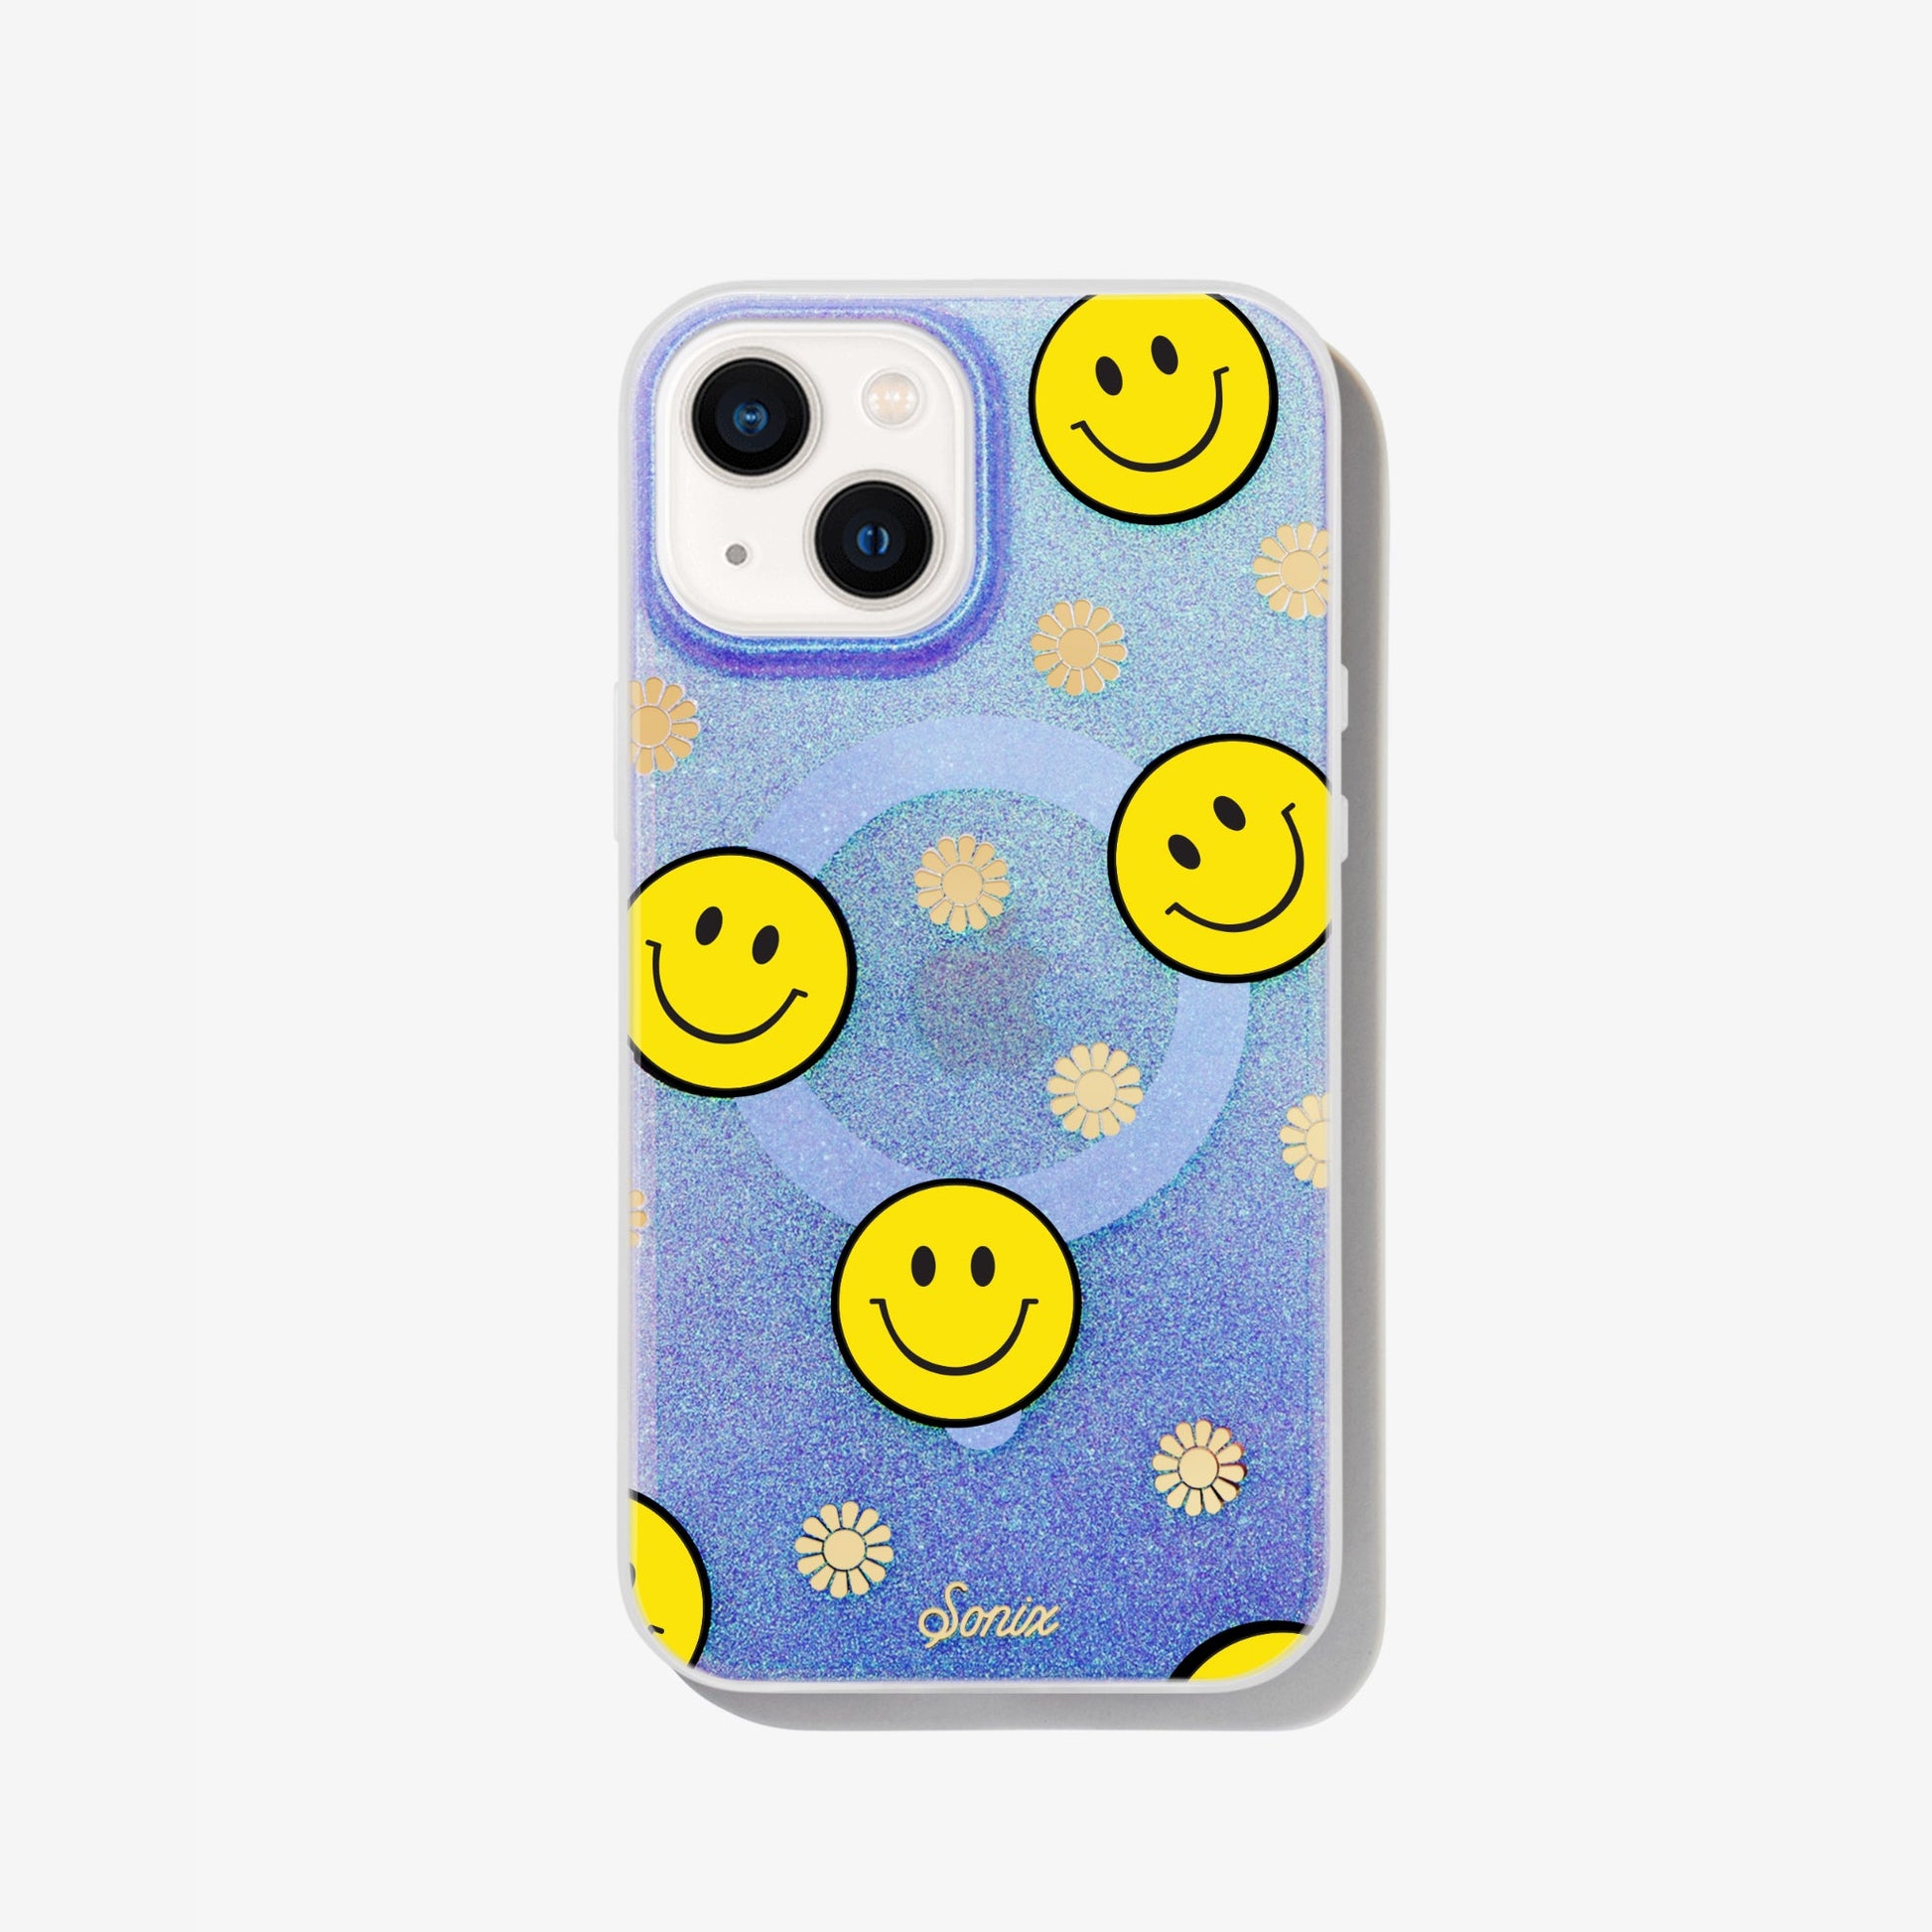 The clear purple case infused with iridescent glitter features happy faces and signature gold foil flowers shown on an iphone 12 